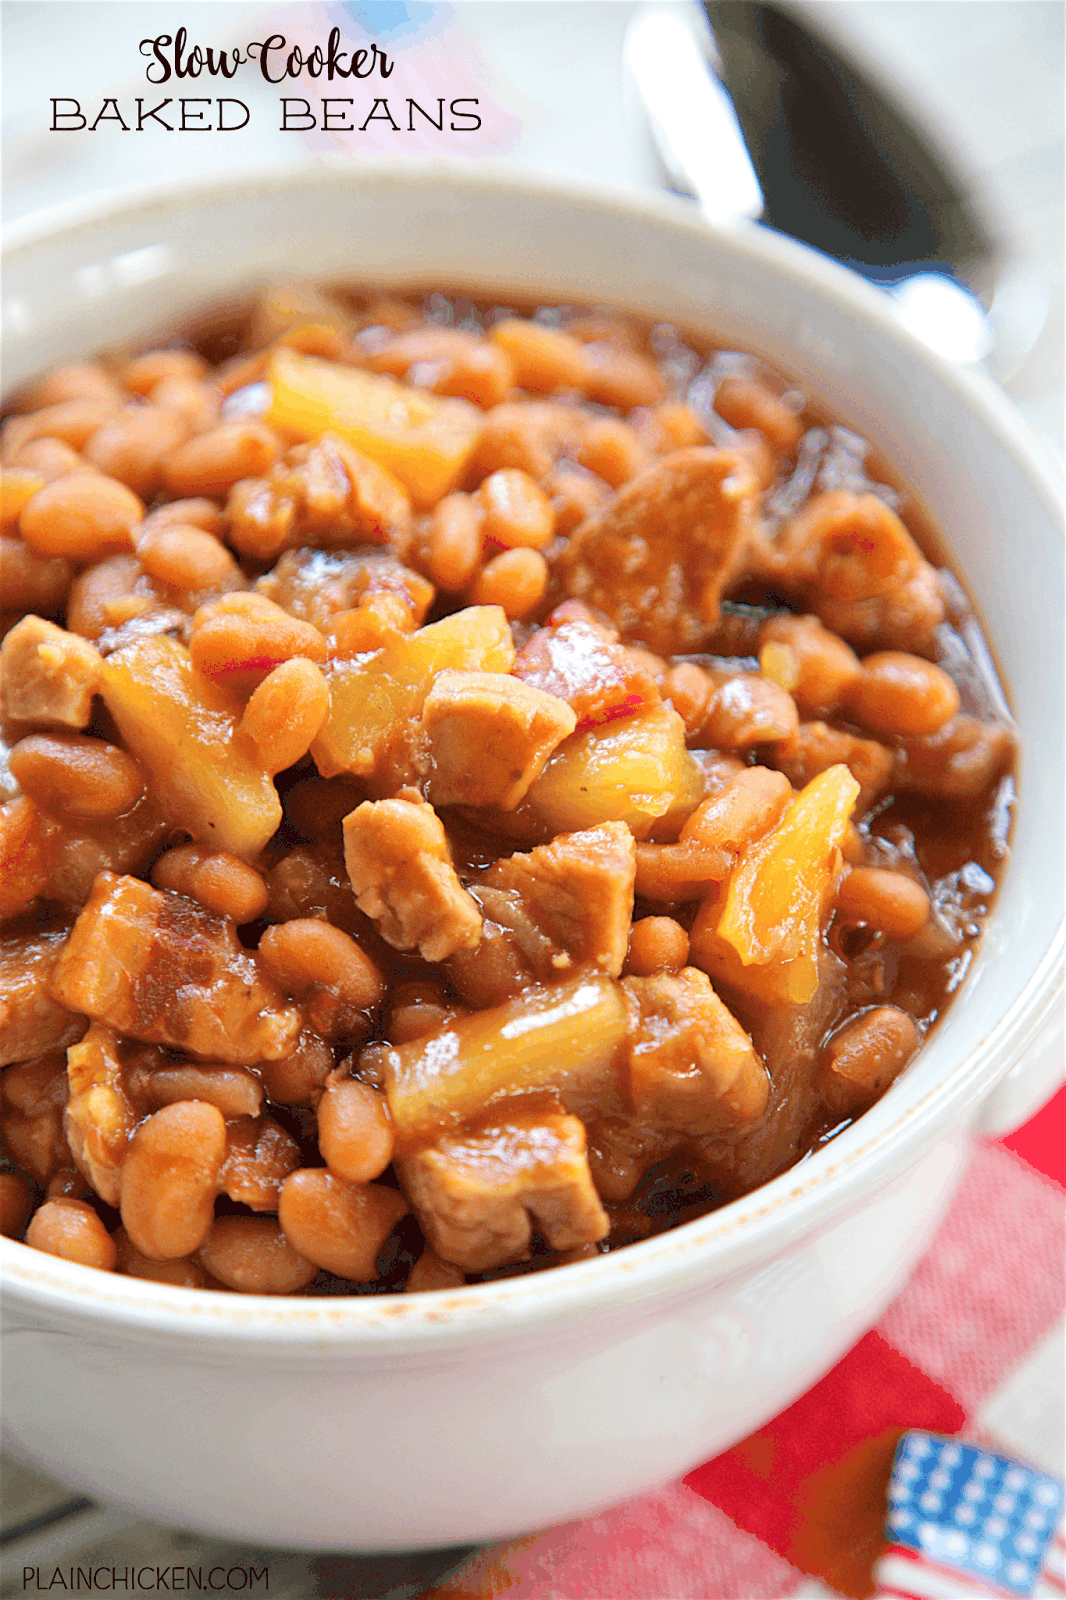 Slow Cooker Baked Beans - absolutely THE BEST baked beans! Bacon, baked beans, onion, mustard, bbq sauce, smoked pork and the secret ingredient - pineapple! SO good! I could make a meal out of these delicious beans! They slow cook all day in the slow cooker. Great for a potluck crowd. Took these to a cookout and everyone asked for the recipe!